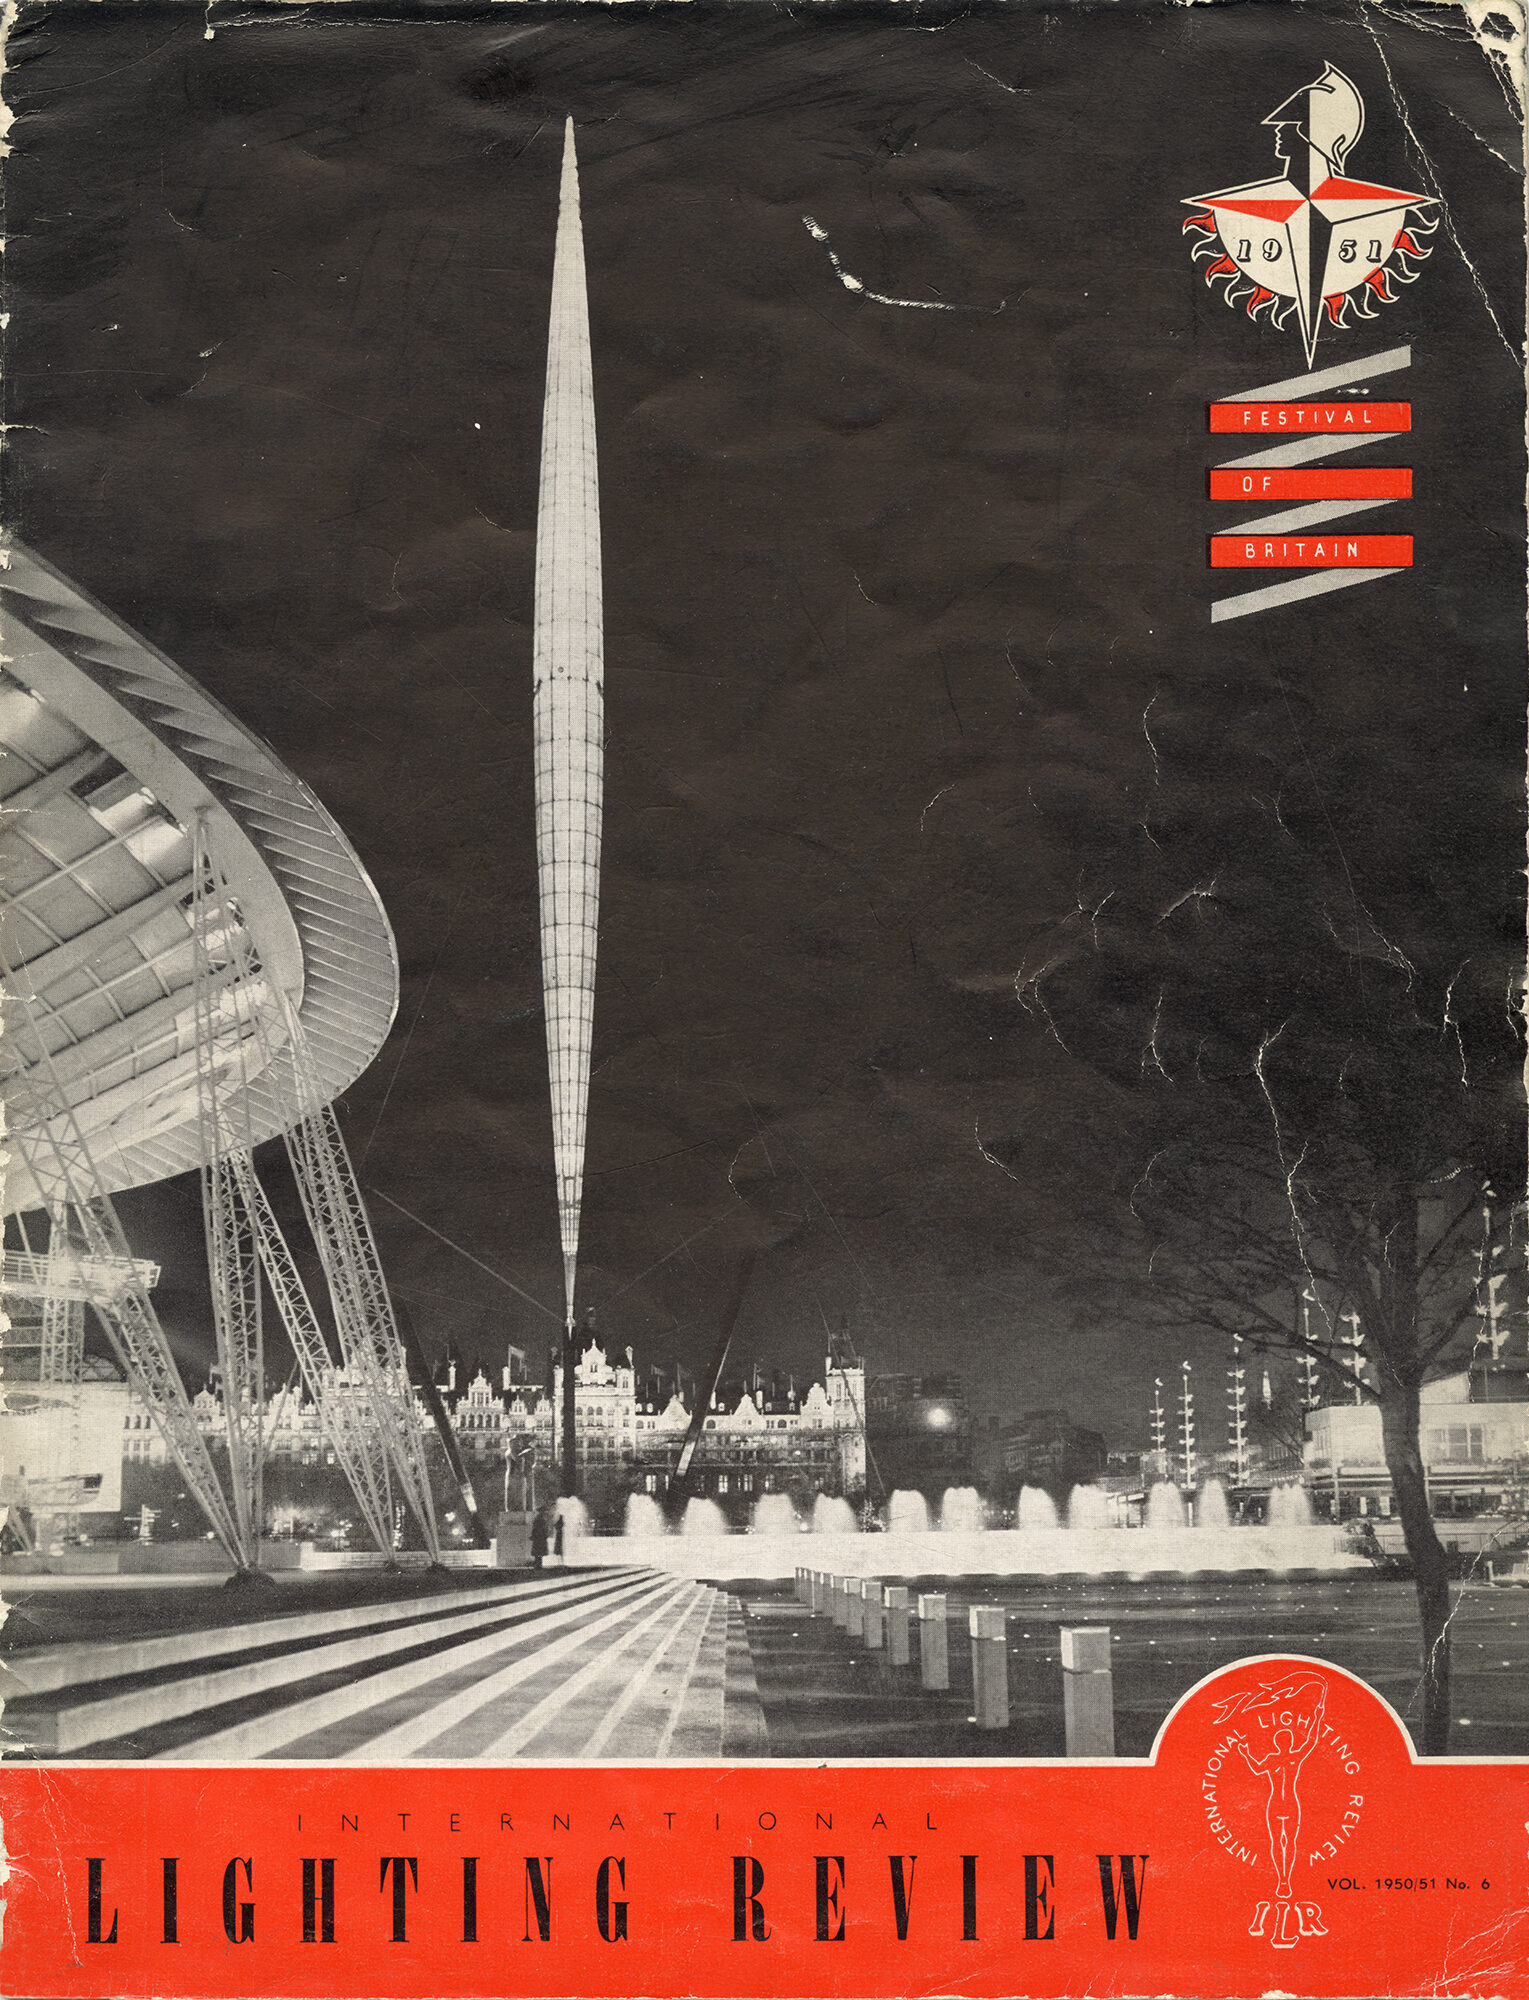 Front cover of The International Lighting Review Vol. 1950/51 No.6 showing a black and white photograph of the Festival of Britain pylon at night